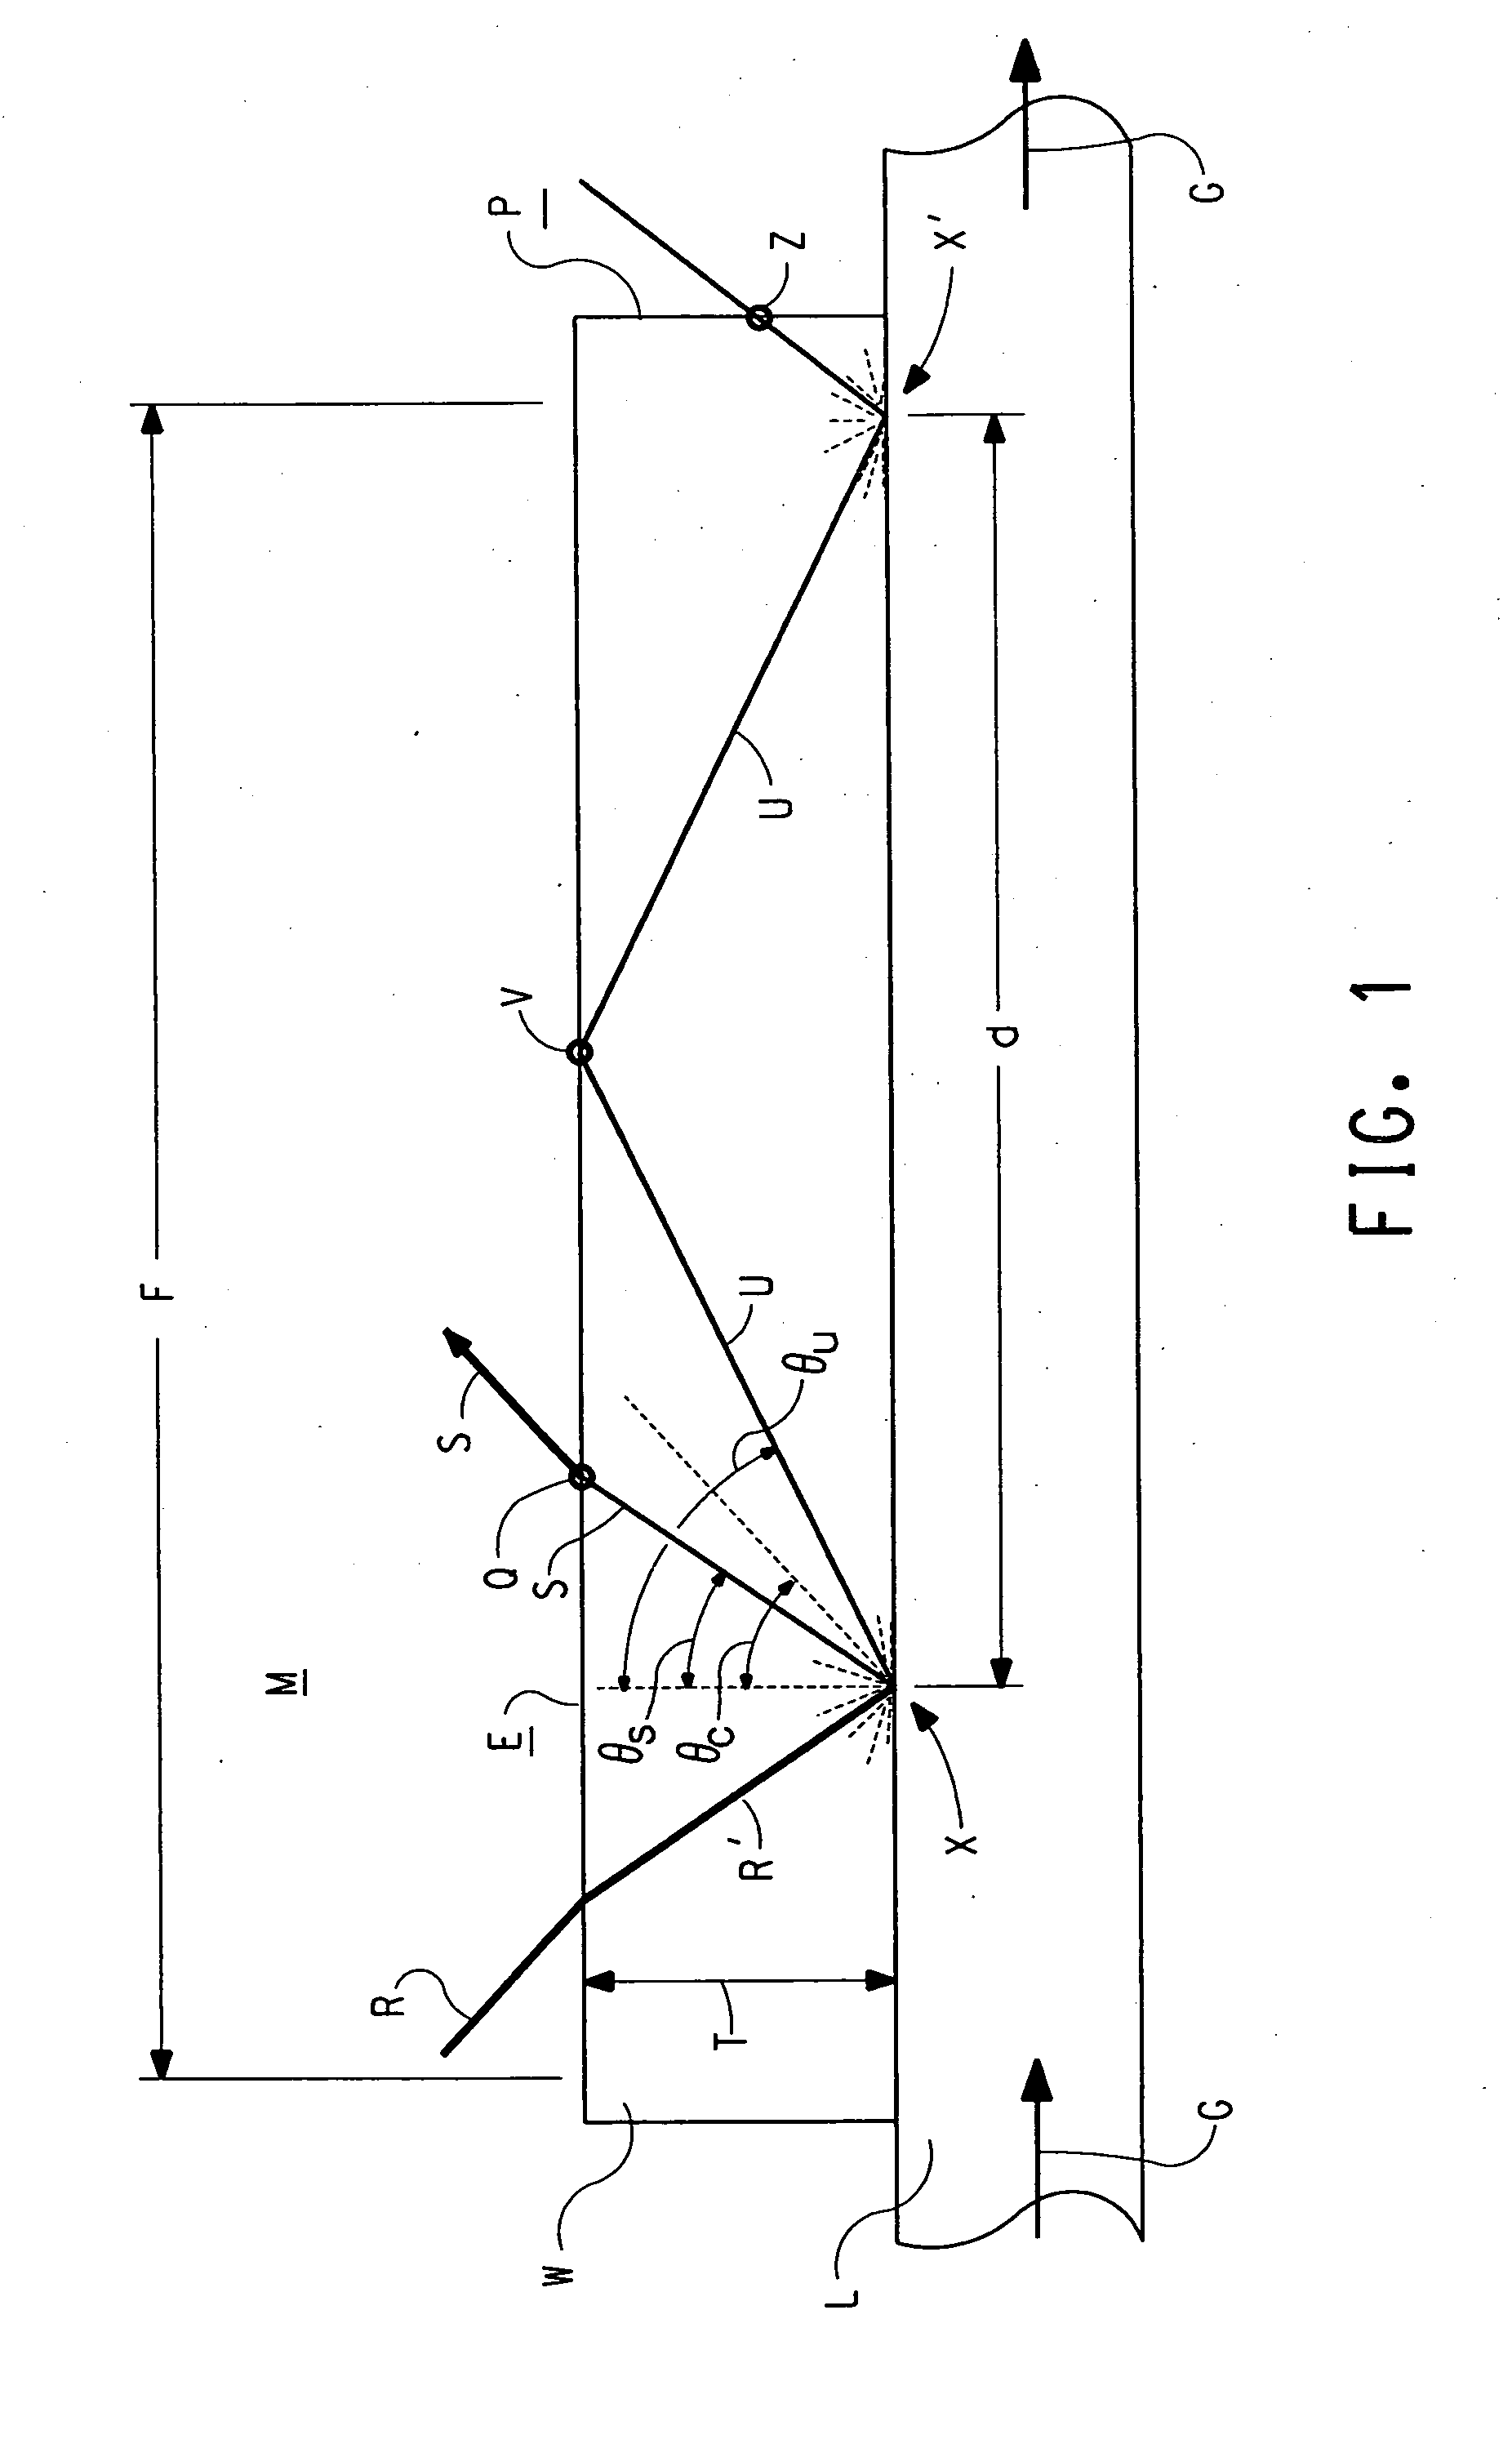 Probe apparatus for measuring a color property of a liquid